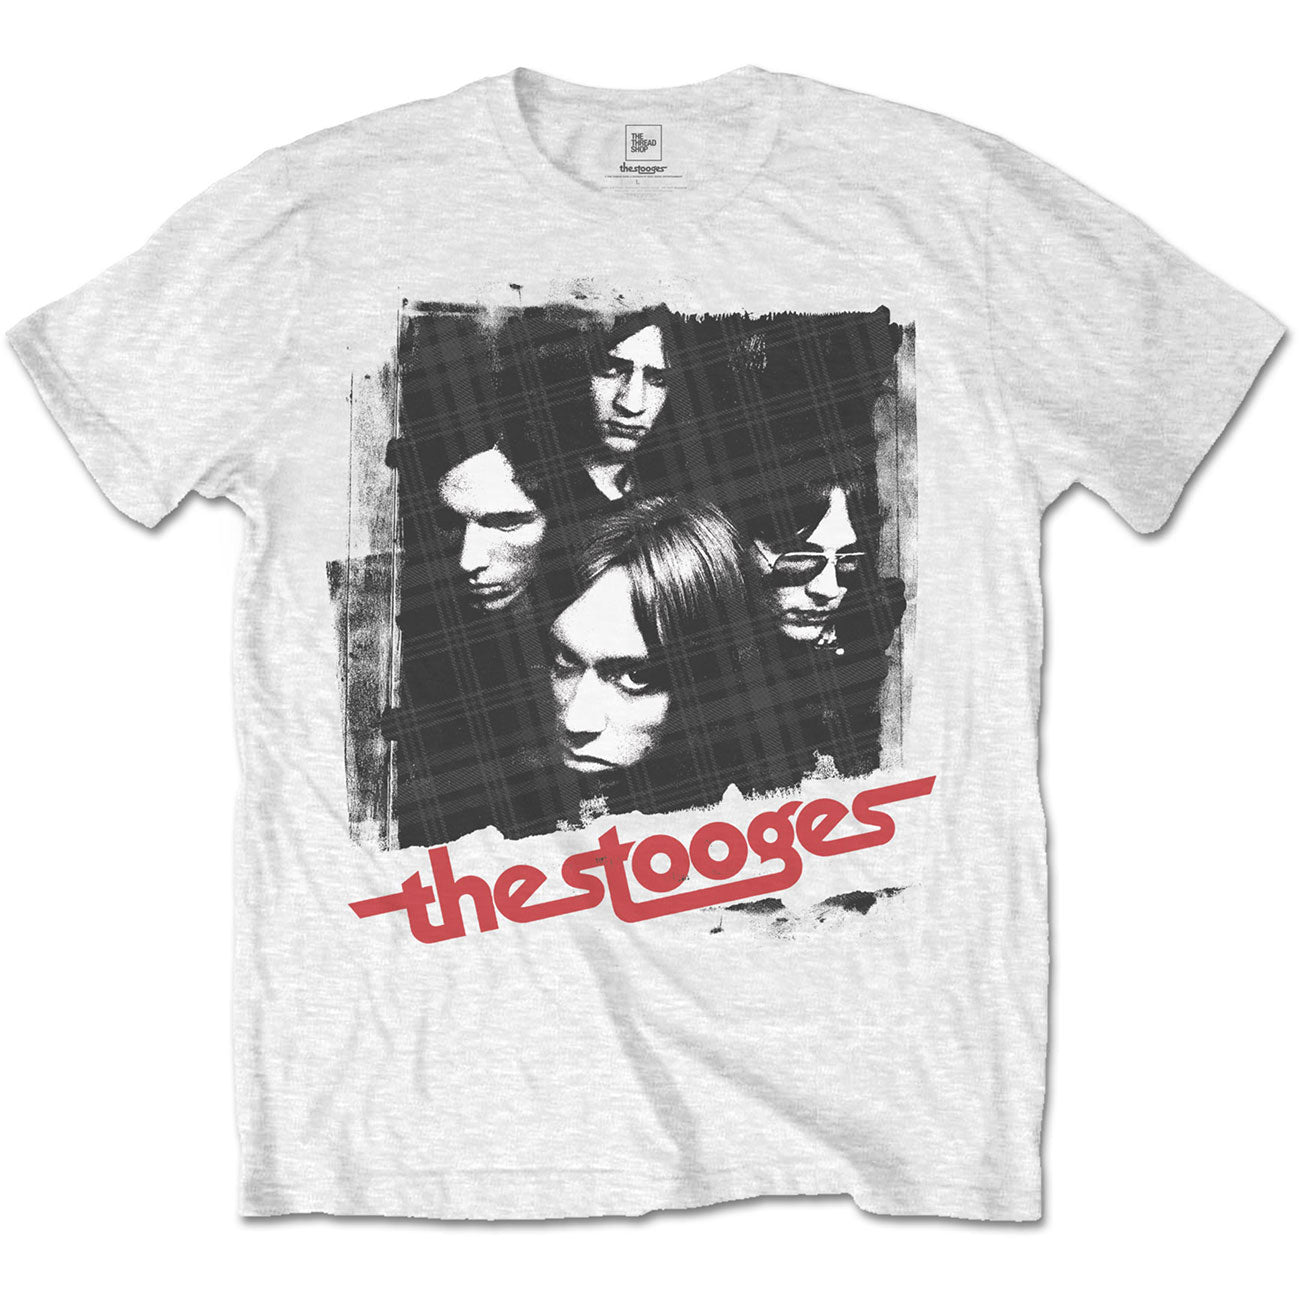 Iggy & The Stooges T-Shirt: Four Faces